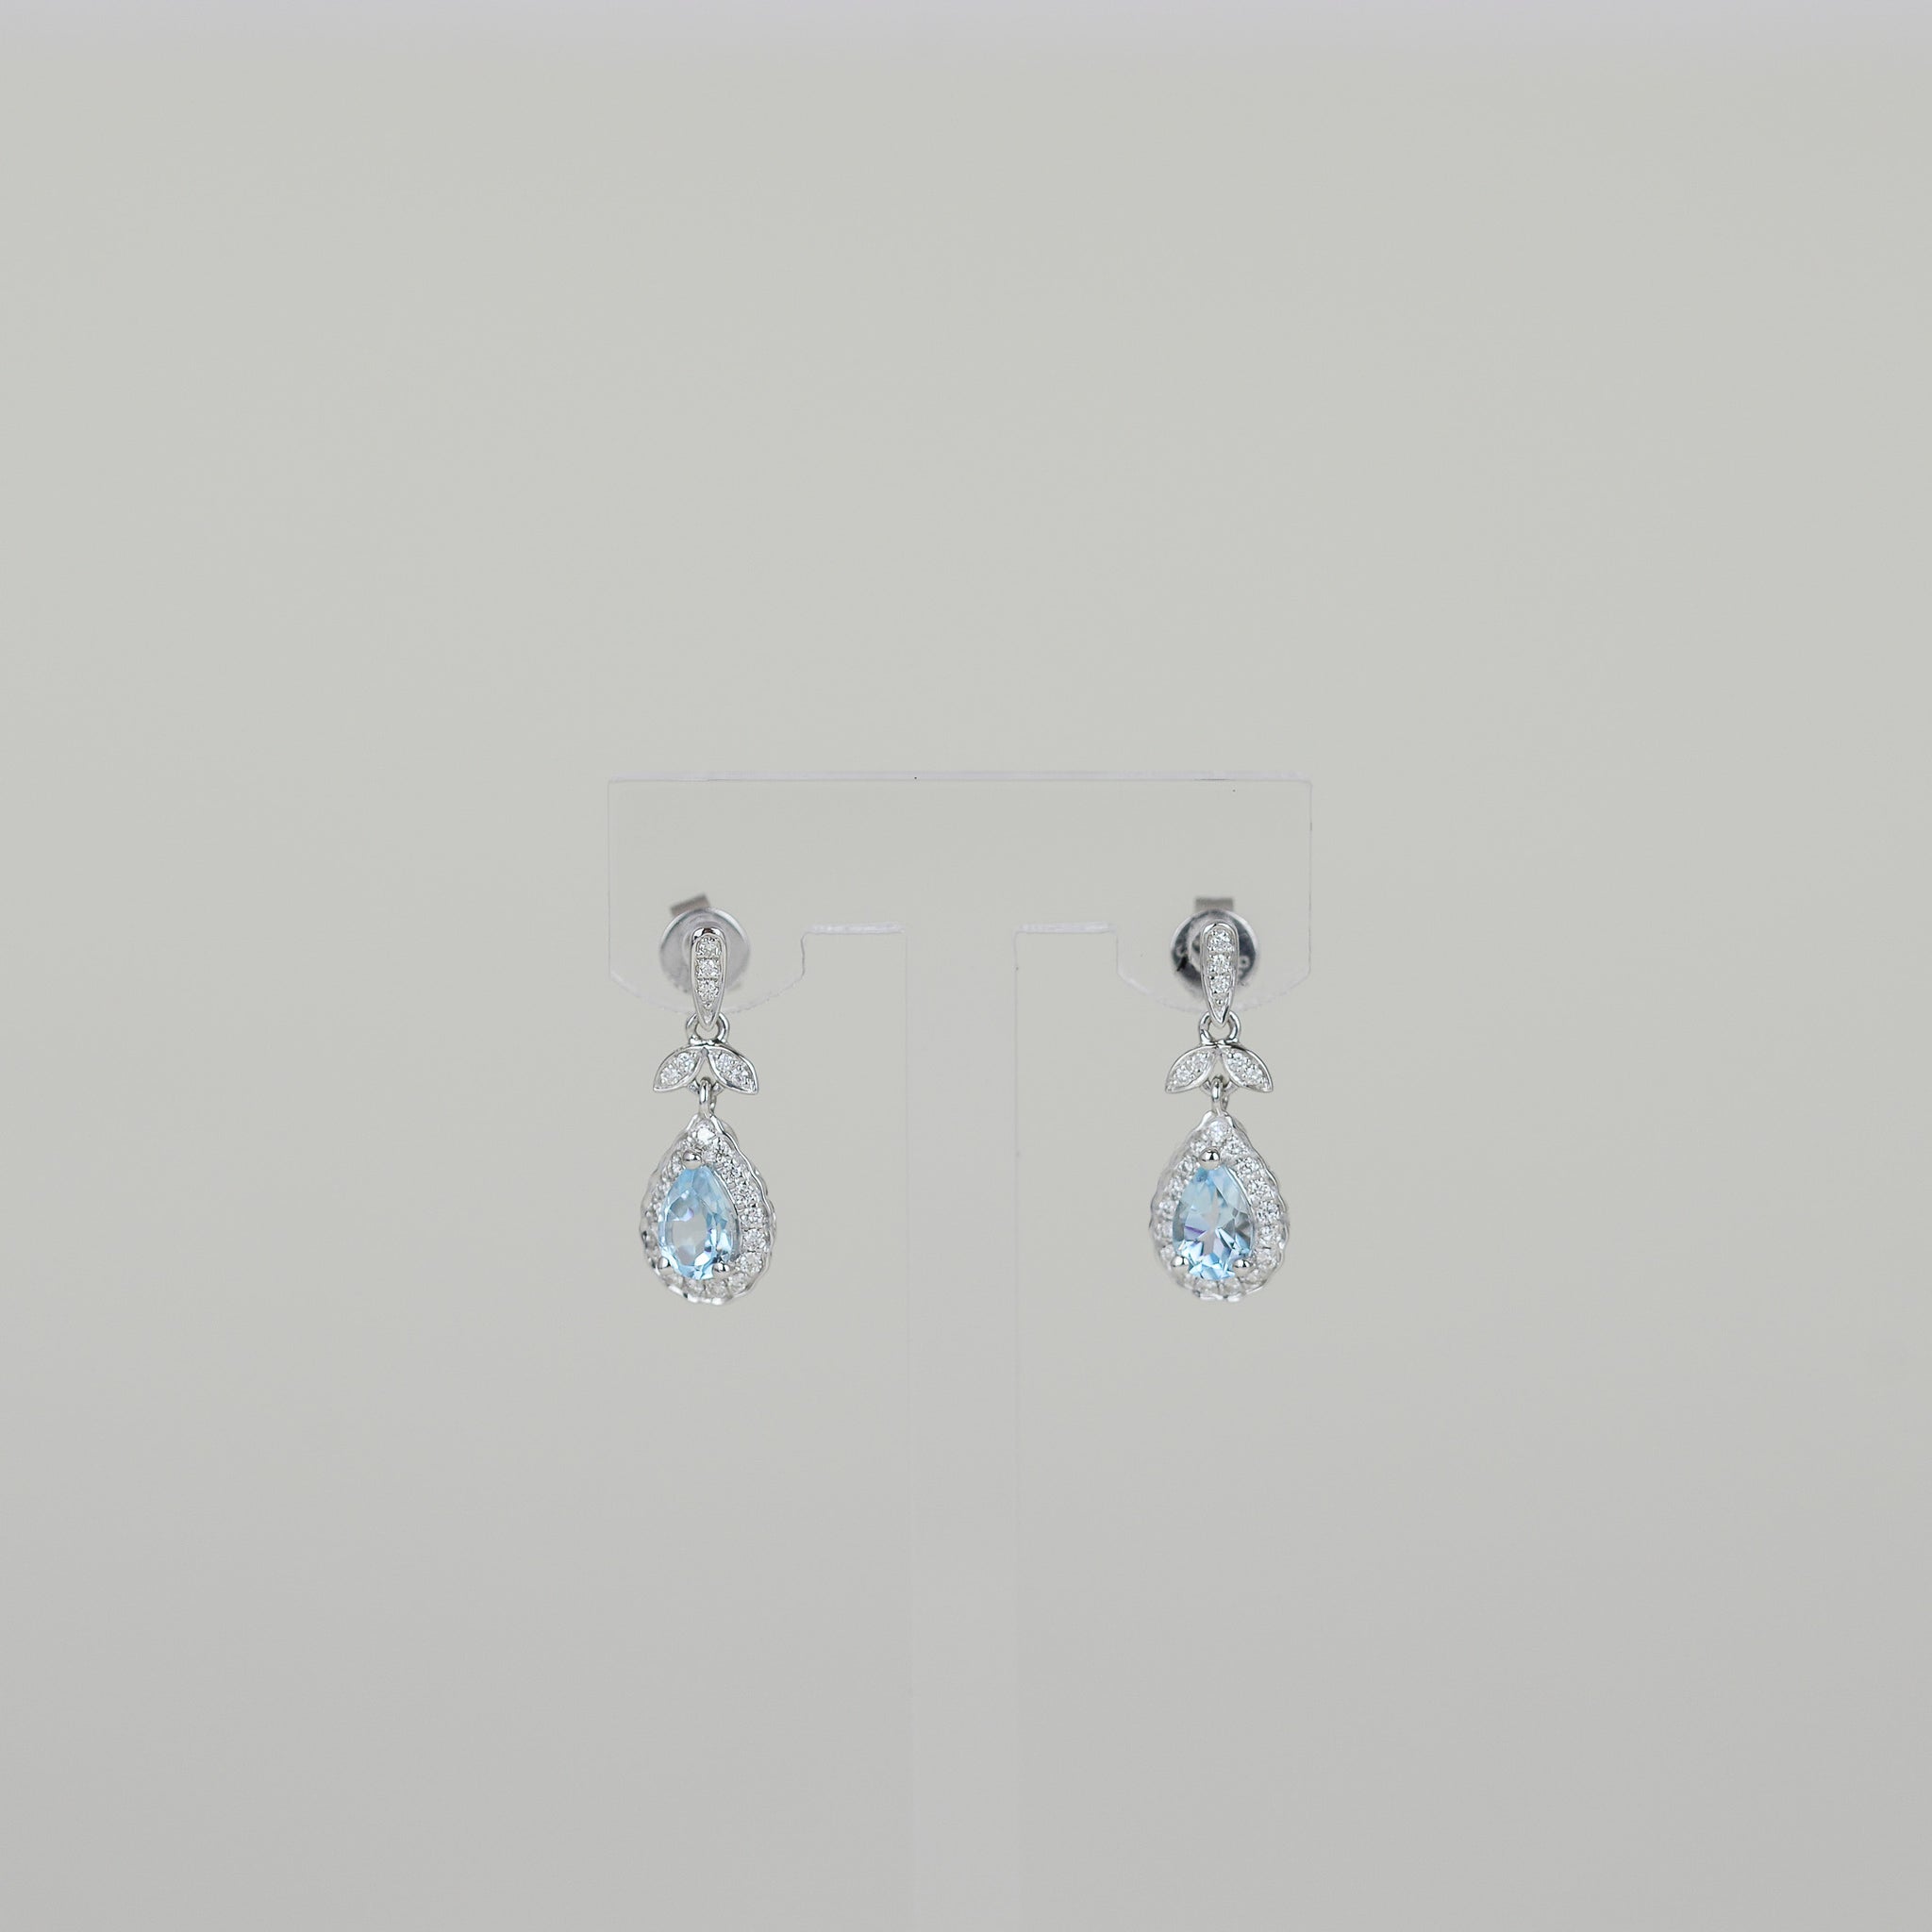 9ct White Gold Pear 1.00ct Blue Topaz and Diamond Drop Earrings